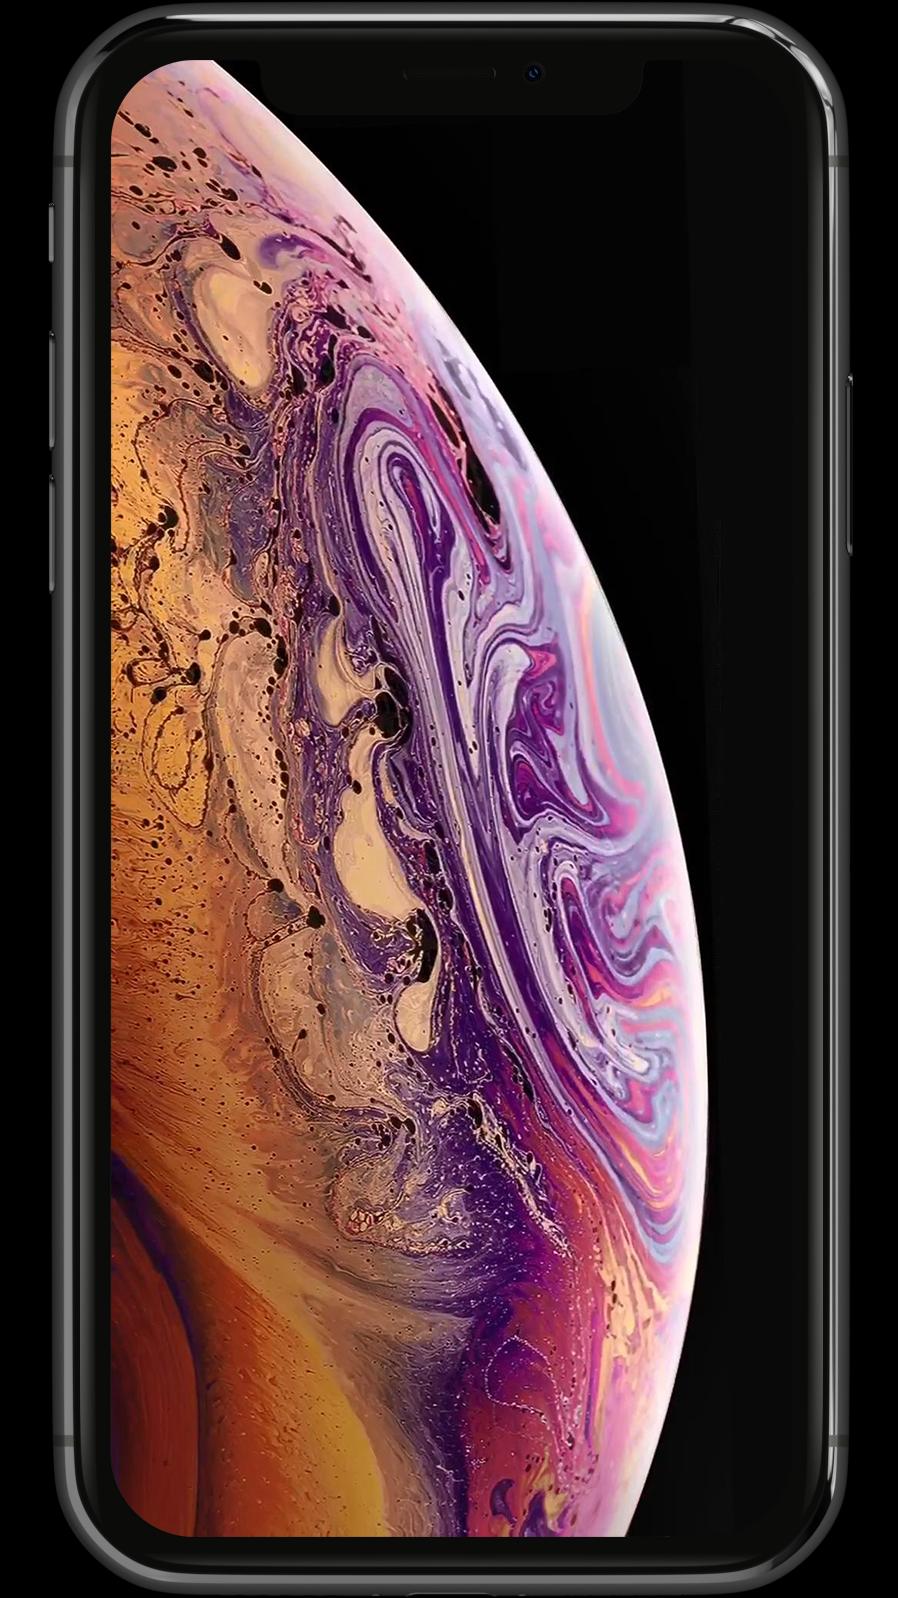 Phone Xs Max Live Wallpaper Video For Android Apk Download